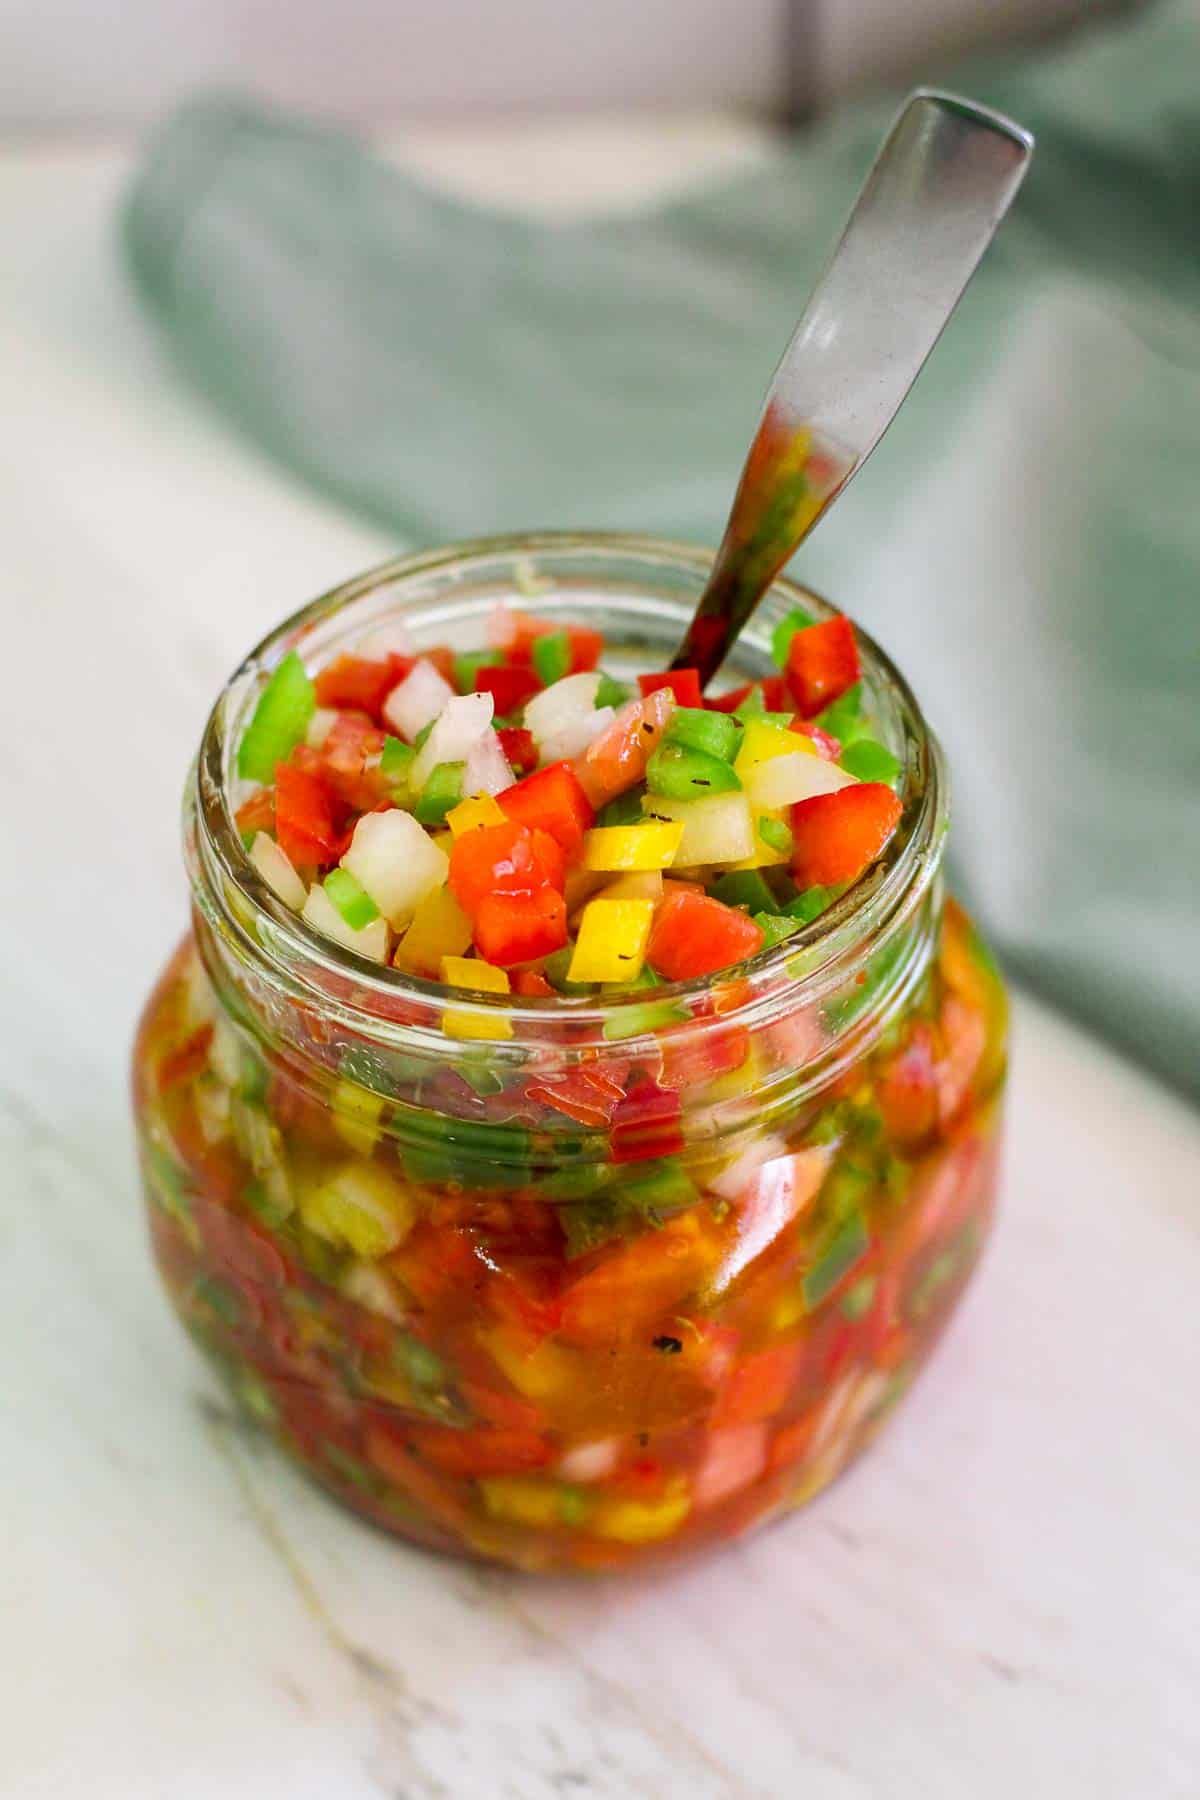 A jar of salsa made with peppers, tomatoes, onions and oil/vinegar. Jar is shown with a spoon in it, ready to serve.